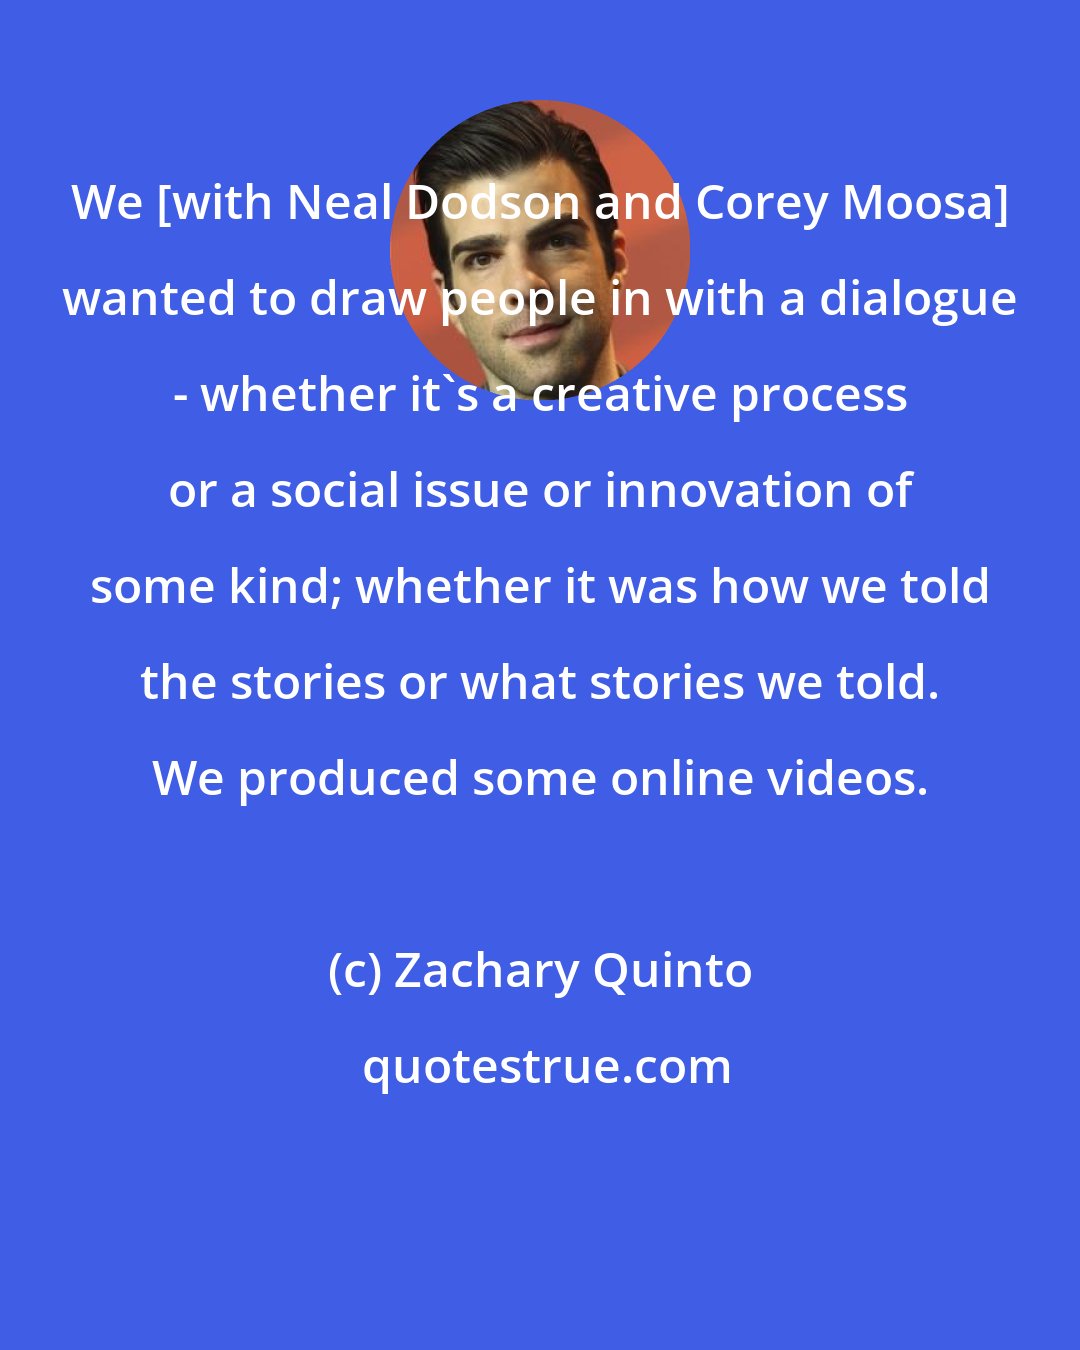 Zachary Quinto: We [with Neal Dodson and Corey Moosa] wanted to draw people in with a dialogue - whether it's a creative process or a social issue or innovation of some kind; whether it was how we told the stories or what stories we told. We produced some online videos.